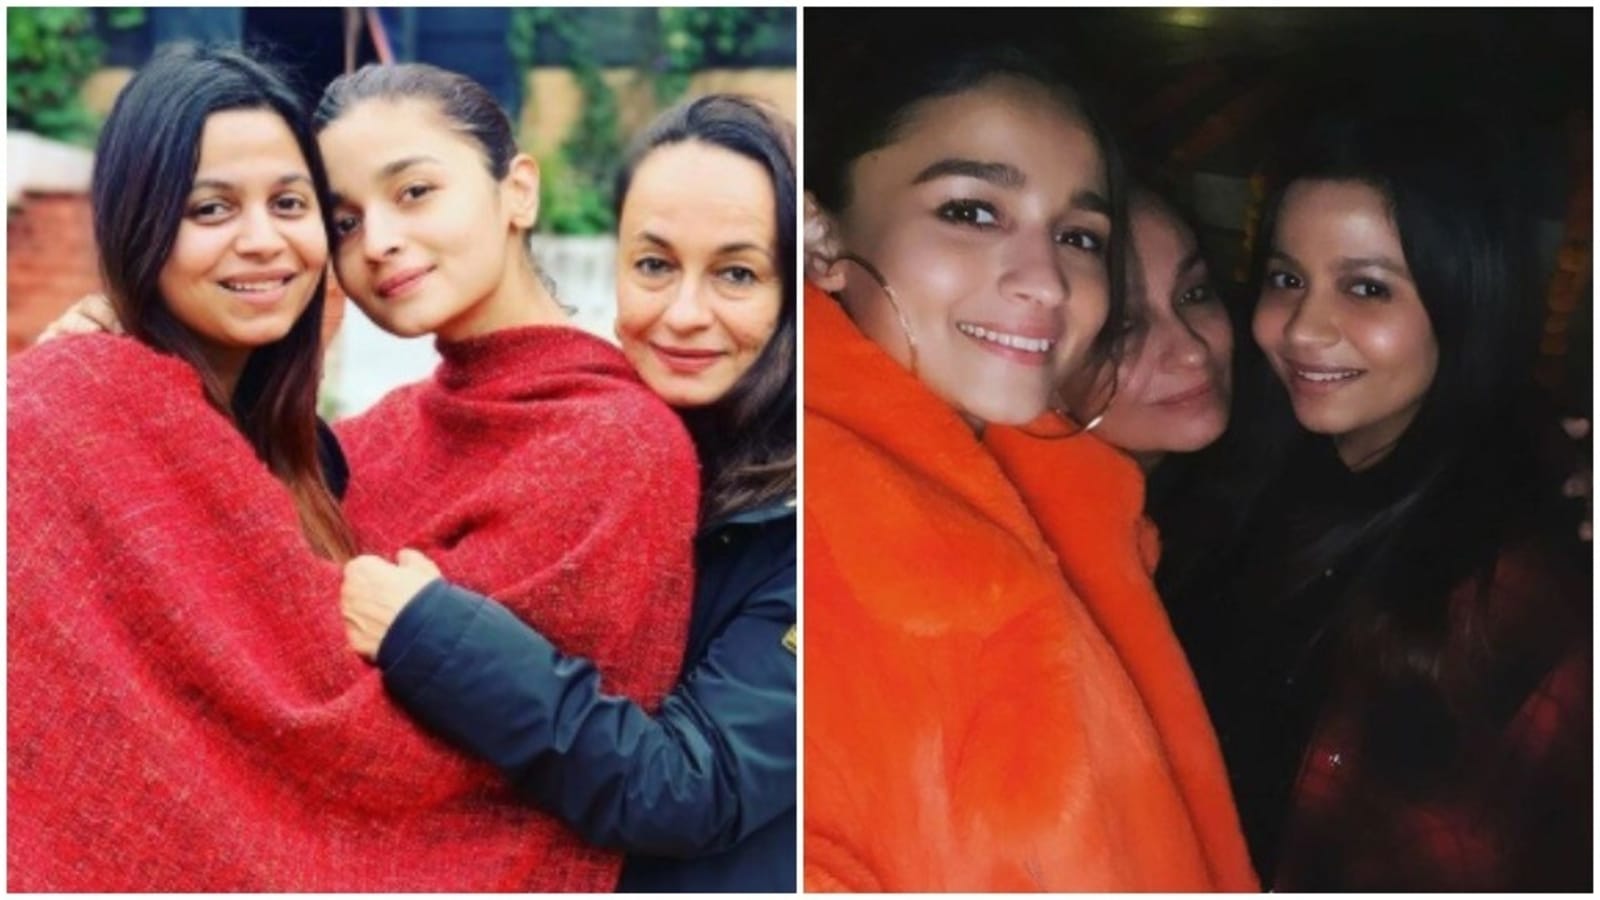 Alia Bhatt Xxx Video Open - Alia Bhatt's mom Soni Razdan poses in throwback pic with her and Shaheen,  calls them 'best daughters ever' | Bollywood - Hindustan Times